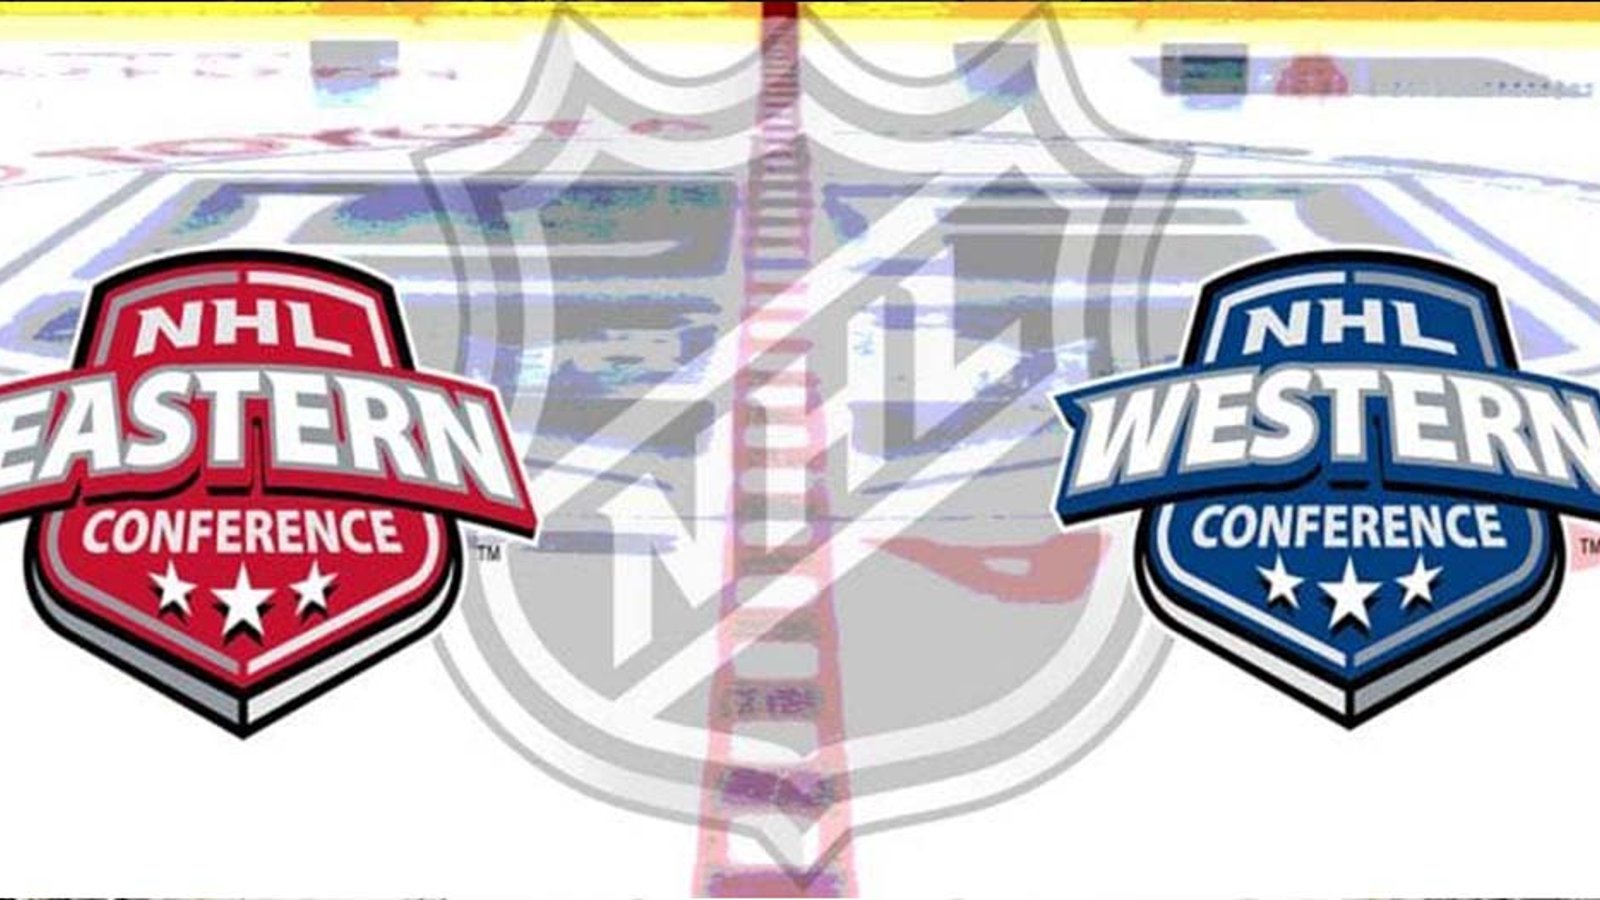 Betting odds released for winning Eastern/Western Conference 